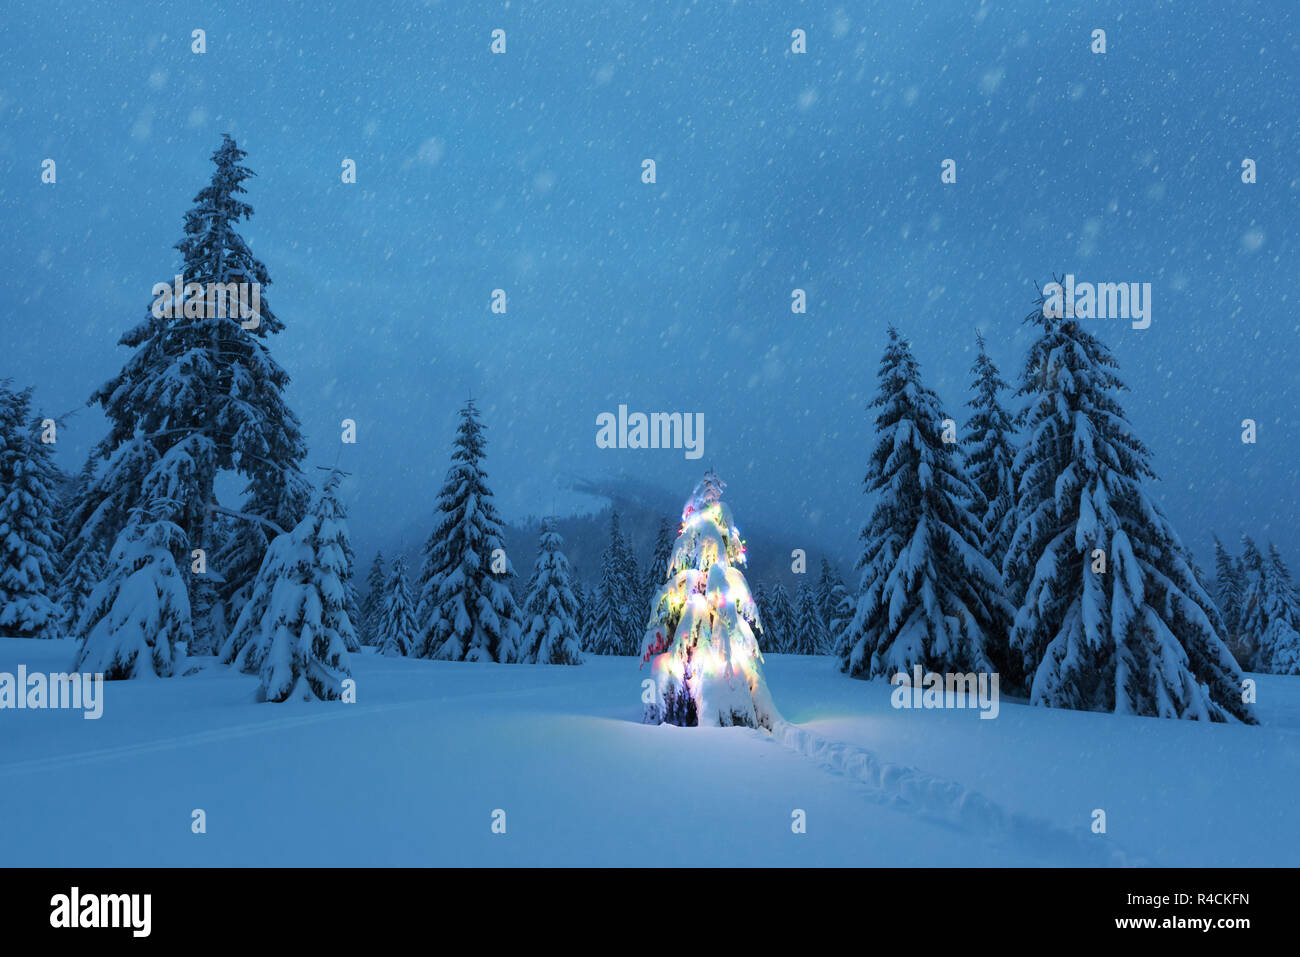 Holiday landscape with Christmas tree, snow and lights in winter mountains. New year celebration concept Stock Photo